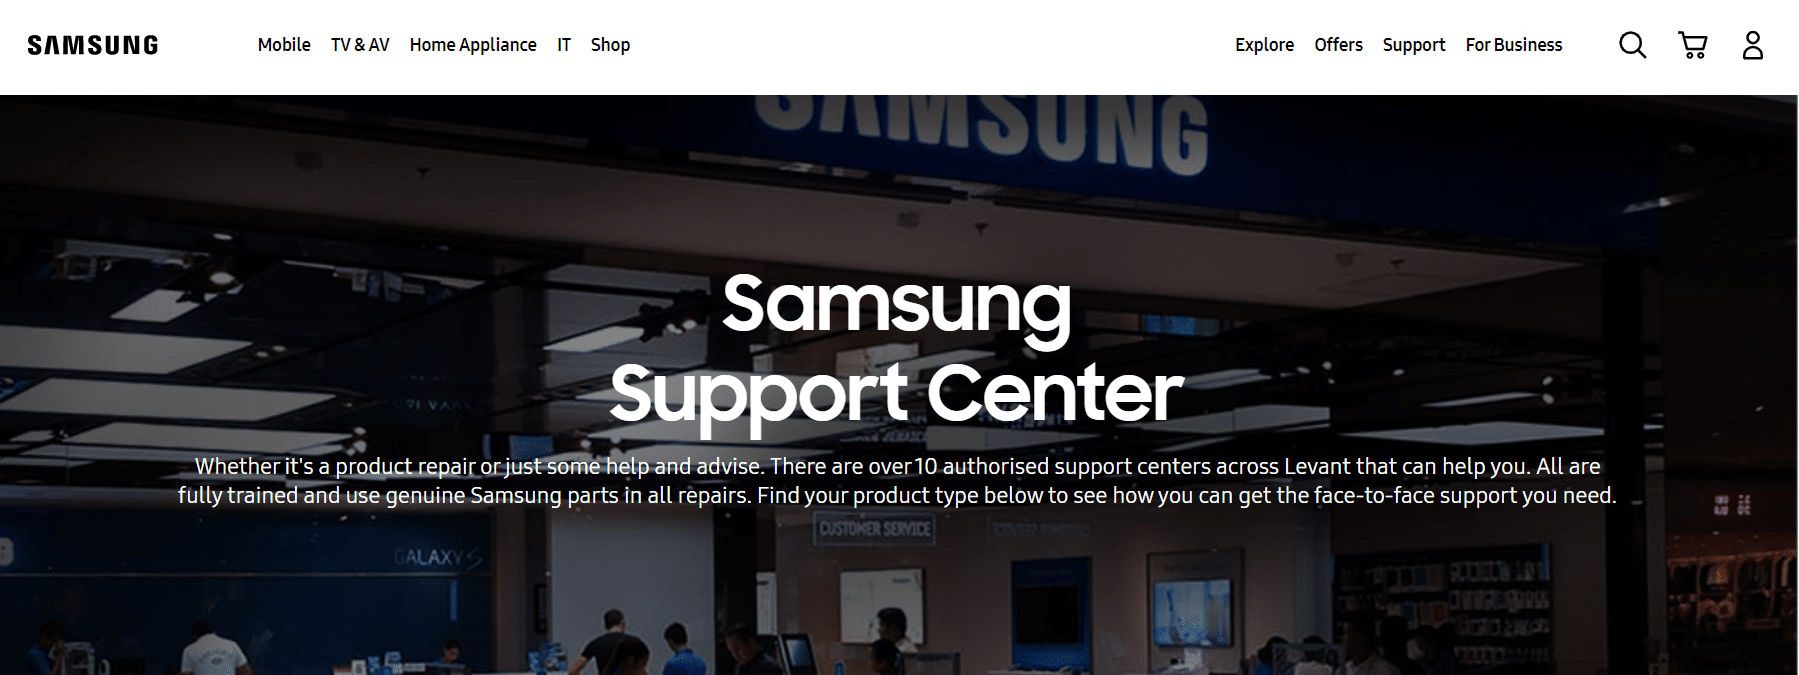 Samsung Support Center. How to Fix Galaxy S6 Won’t Charge